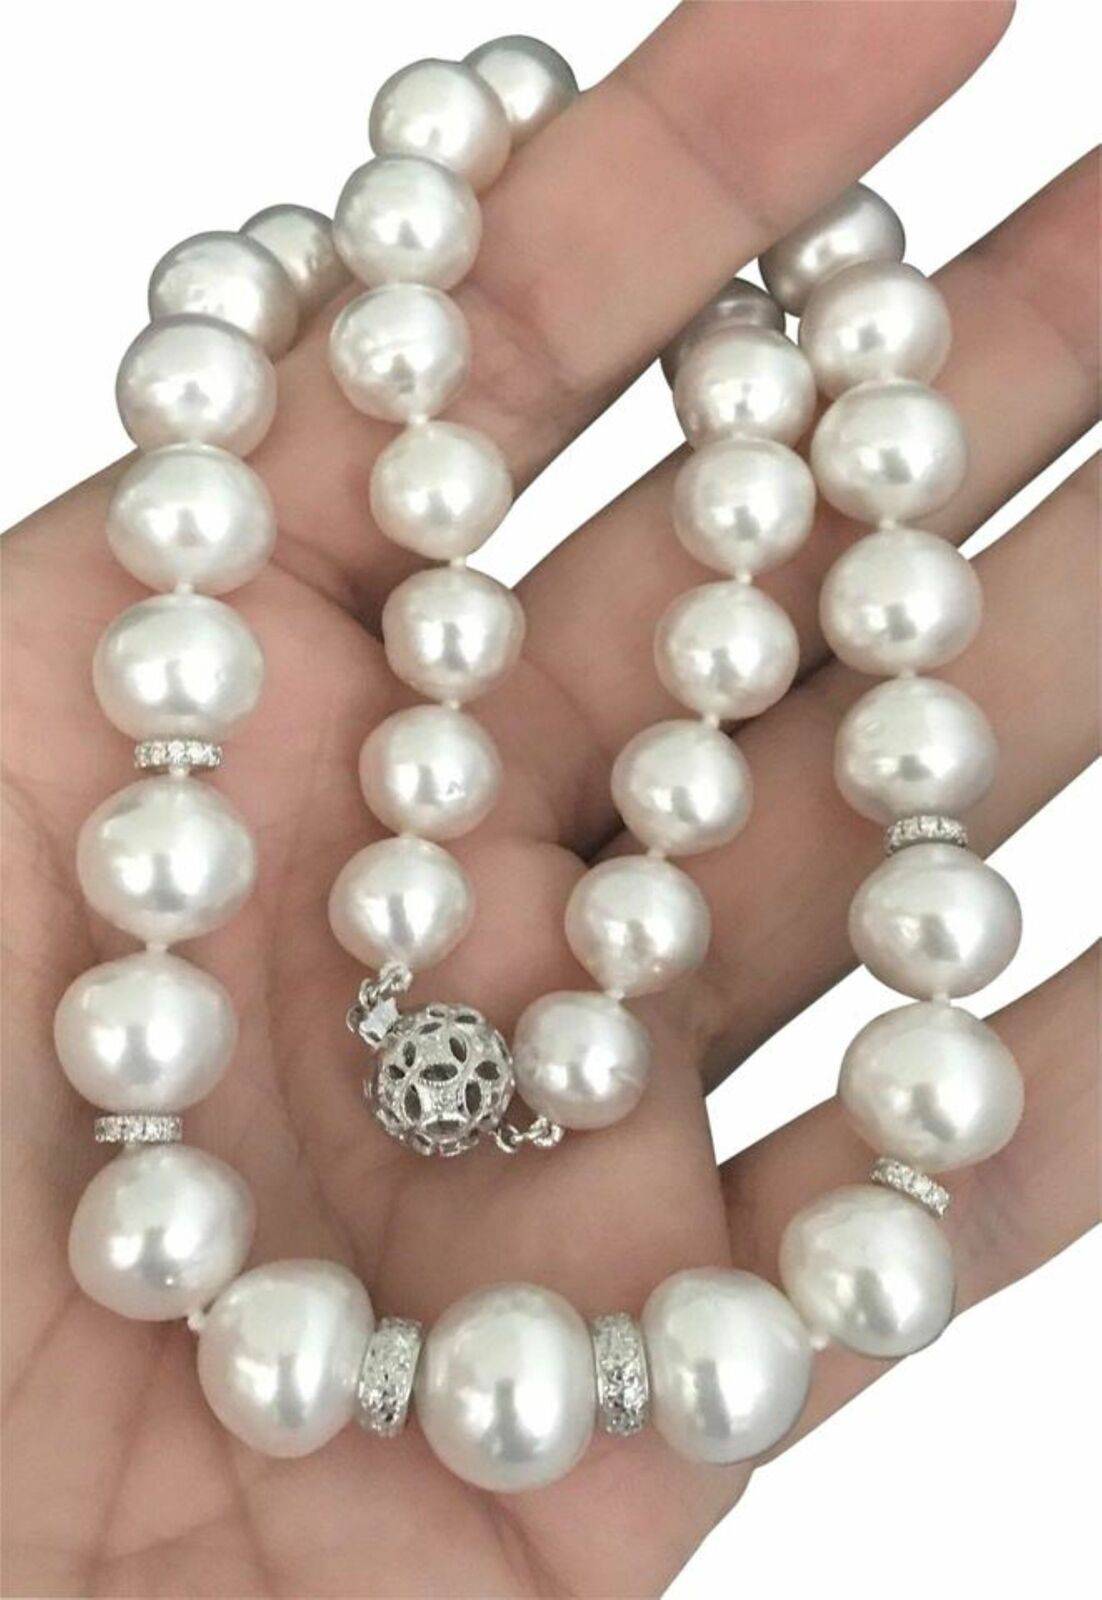 Diamond South Sea Pearl Necklace 14k Gold 13 mm 18.2" Certified $15,450 817025 - Certified Estate Jewelry